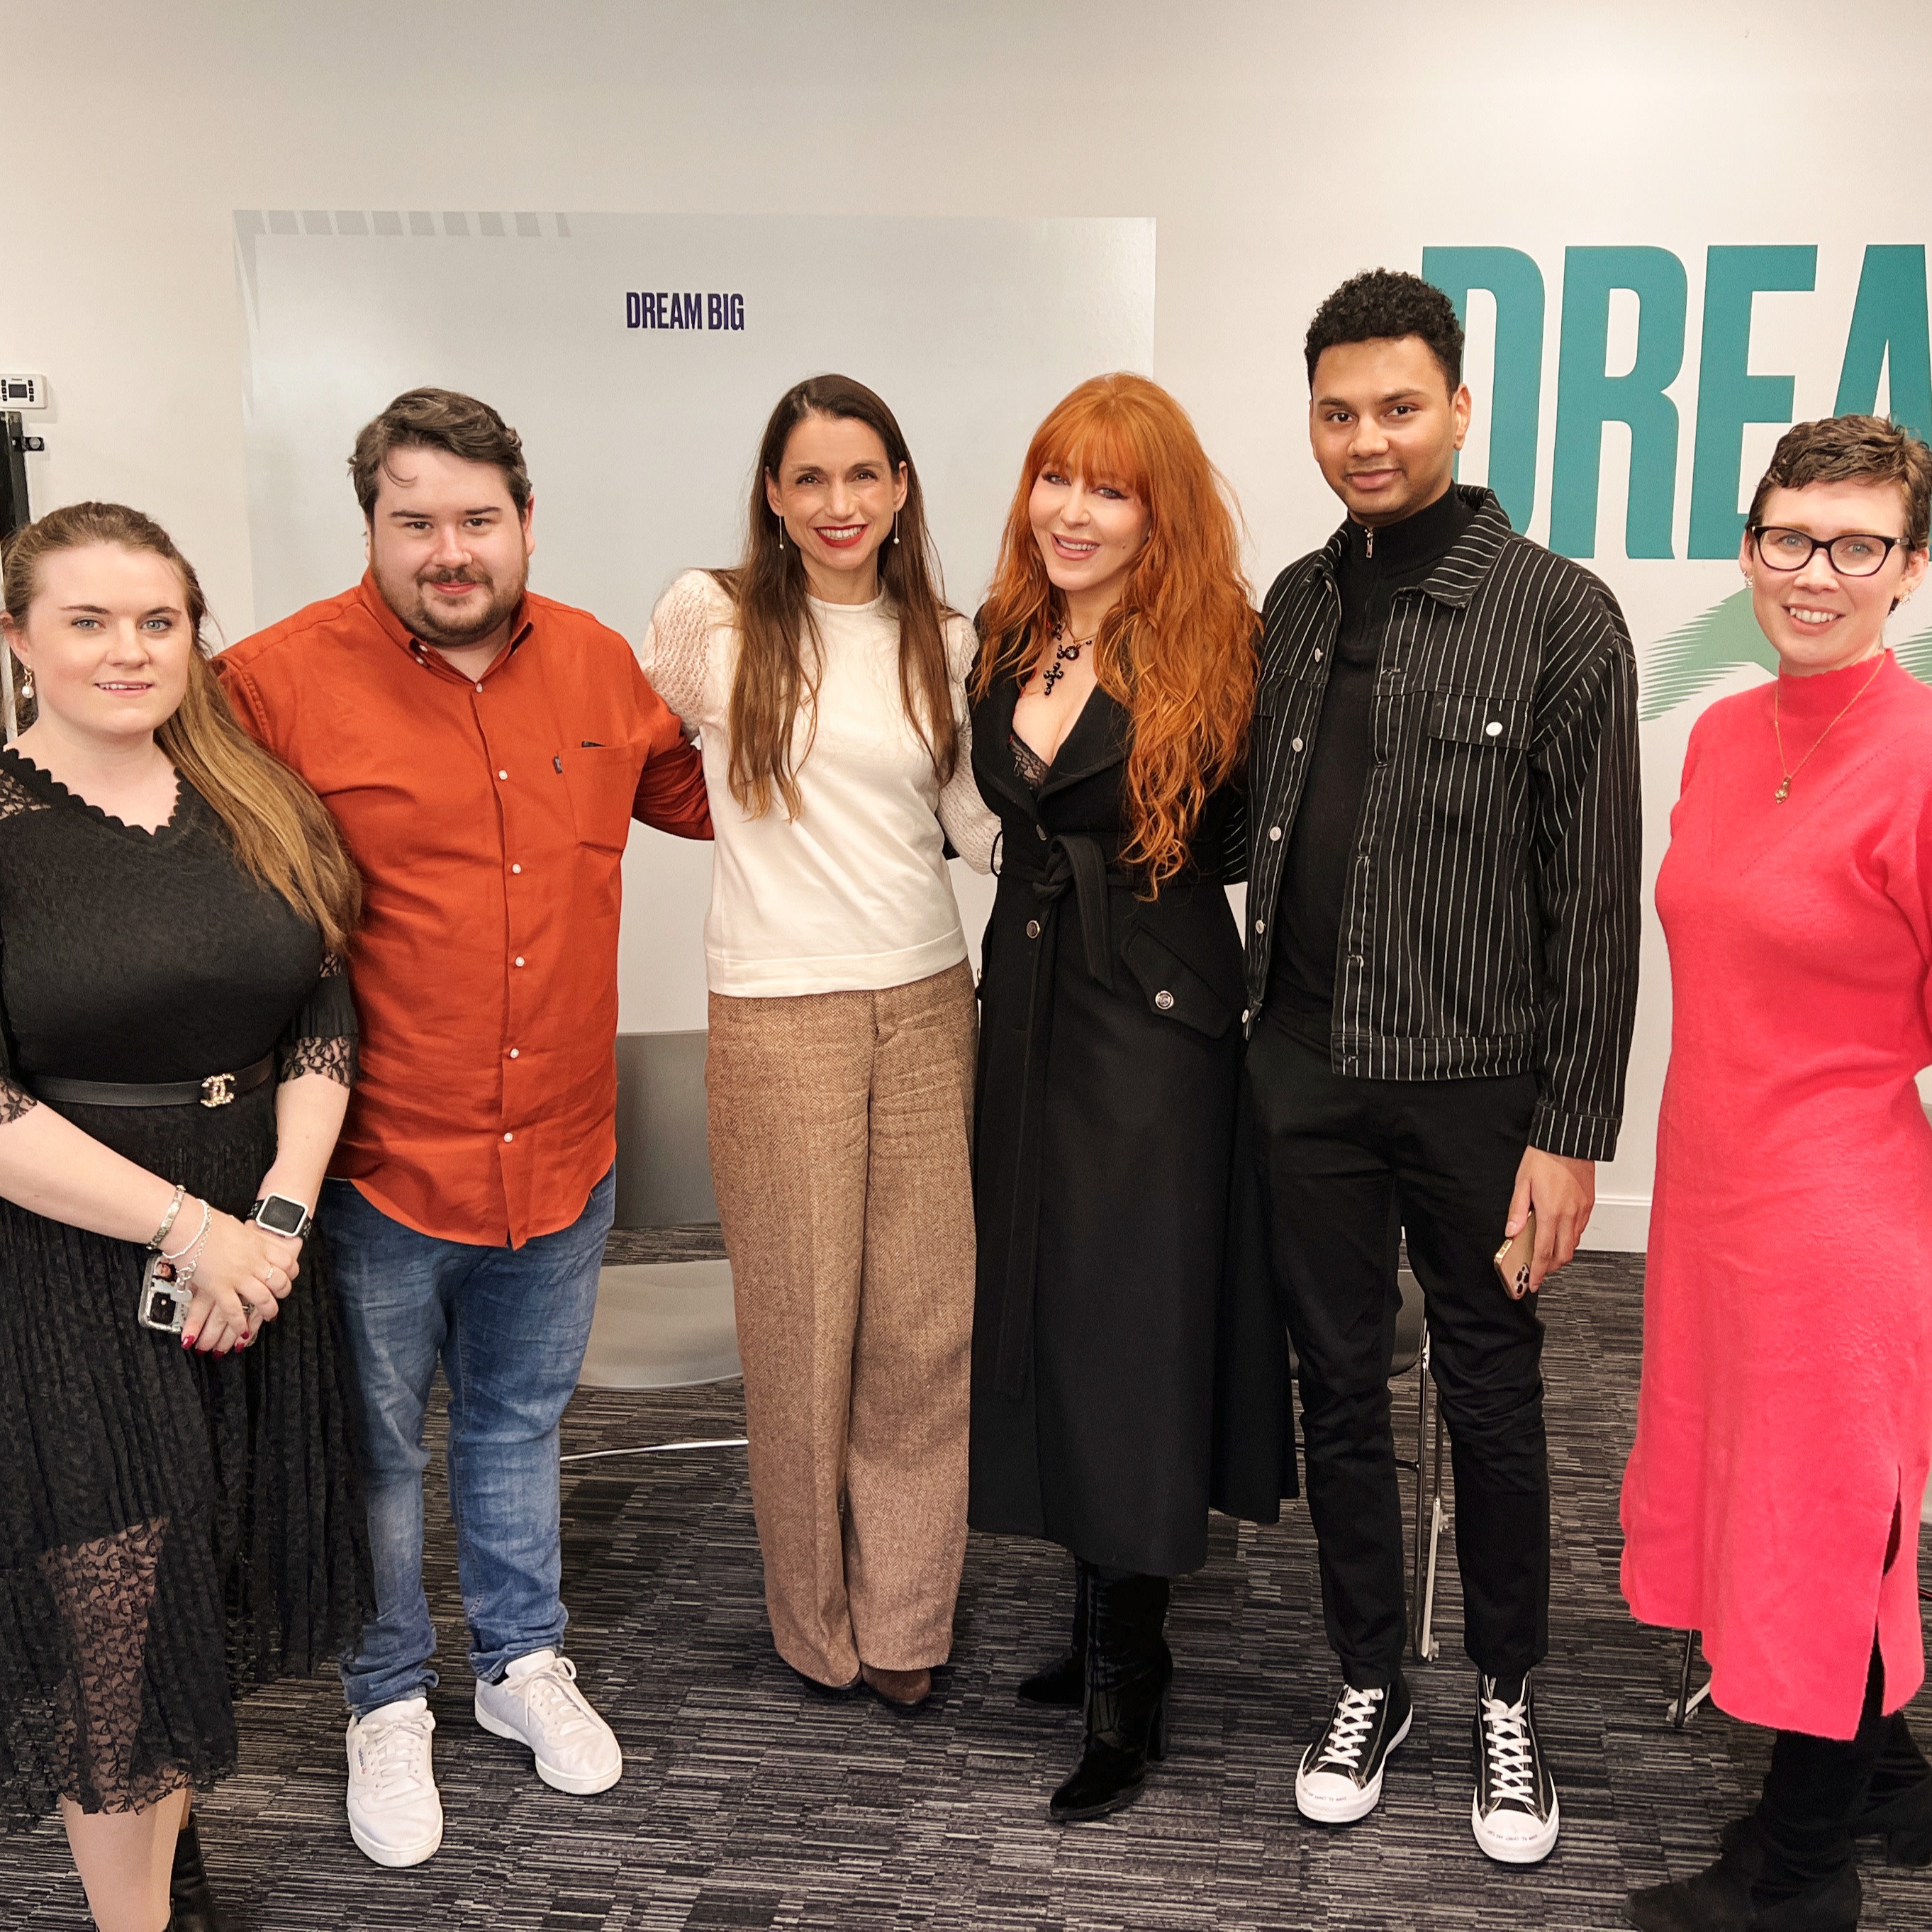 Charlotte Tilbury with a group of people from The Prince Trust organisation.